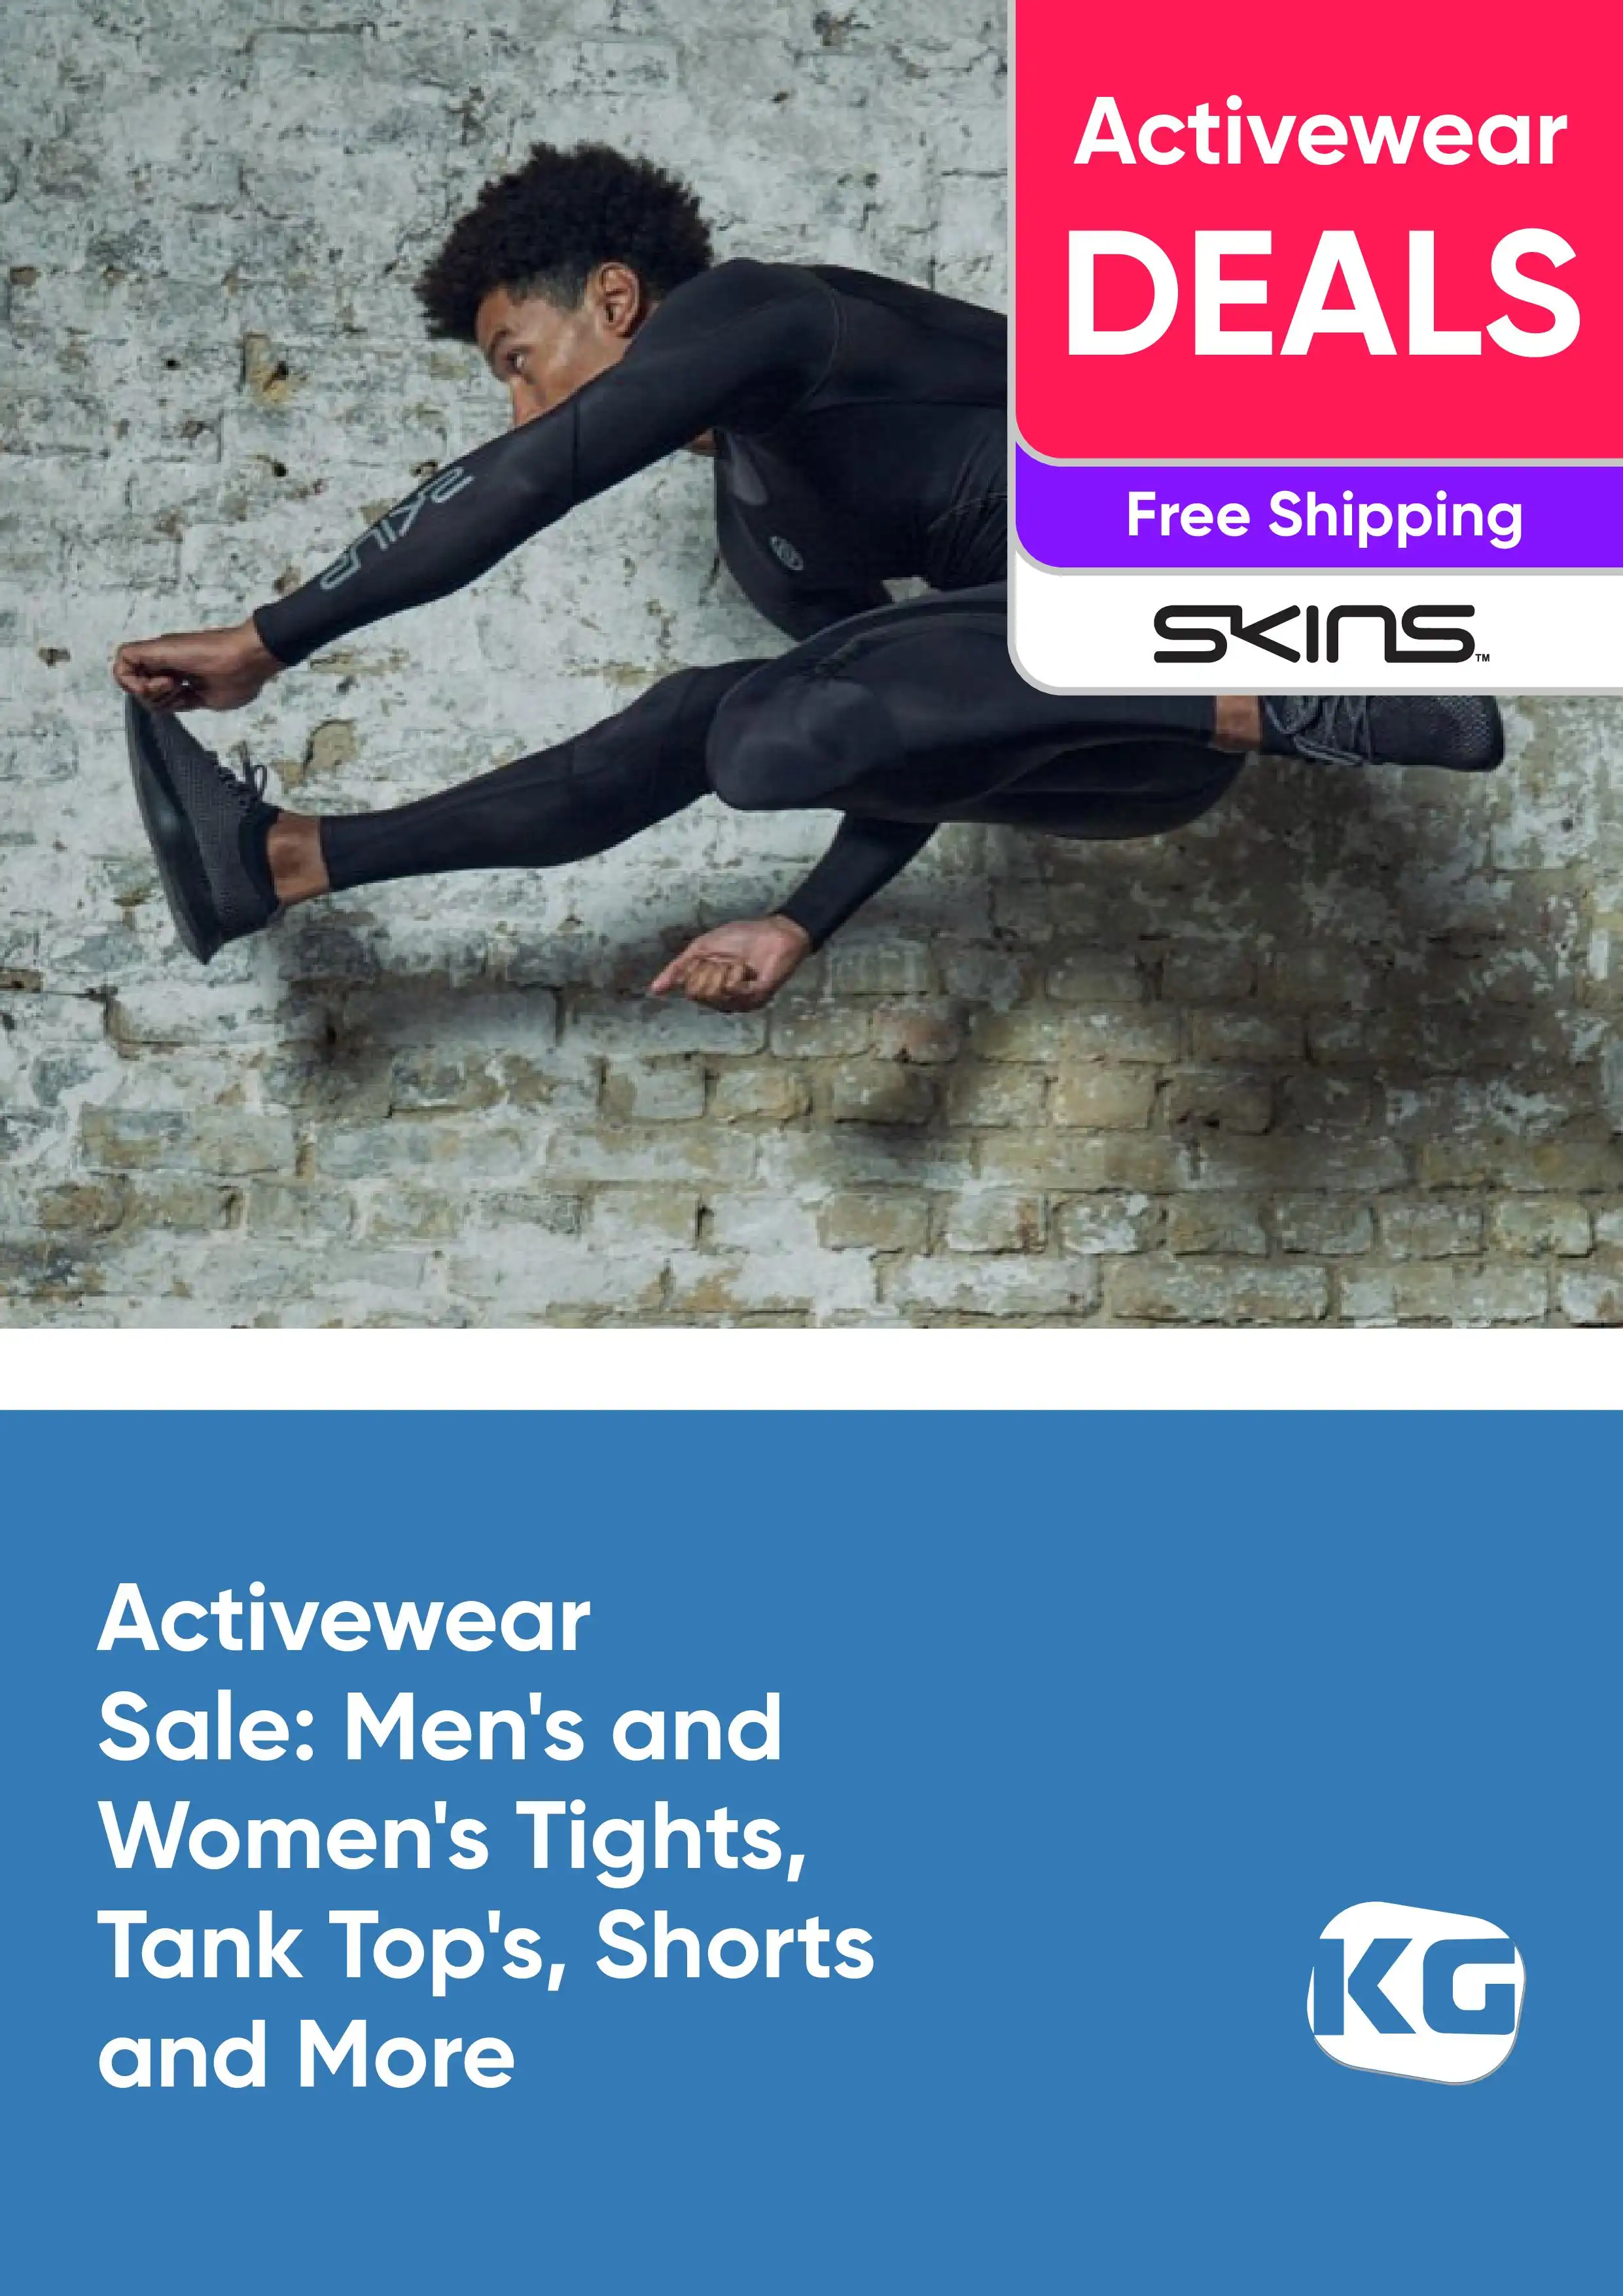 Activewear Sale - Men's and Women's Tights, Tank Tops, Shorts and More - SKINS